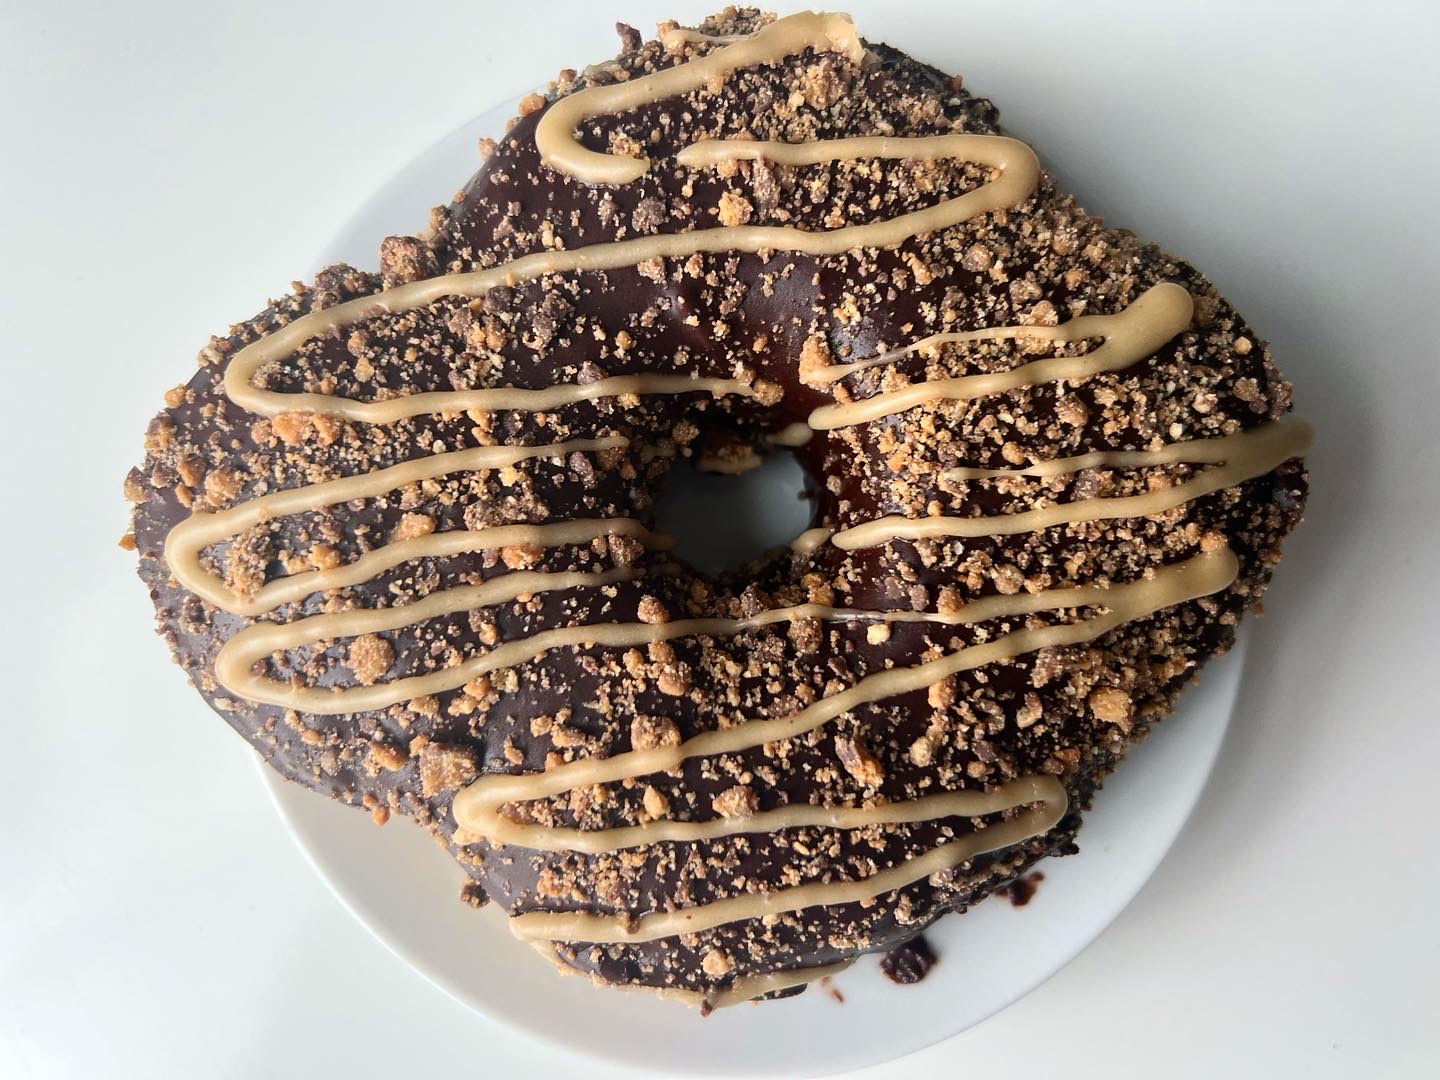 On a white plate, there is a giant chocolate donut with a light brown peanut butter drizzle. Photo by Alyssa Buckley.